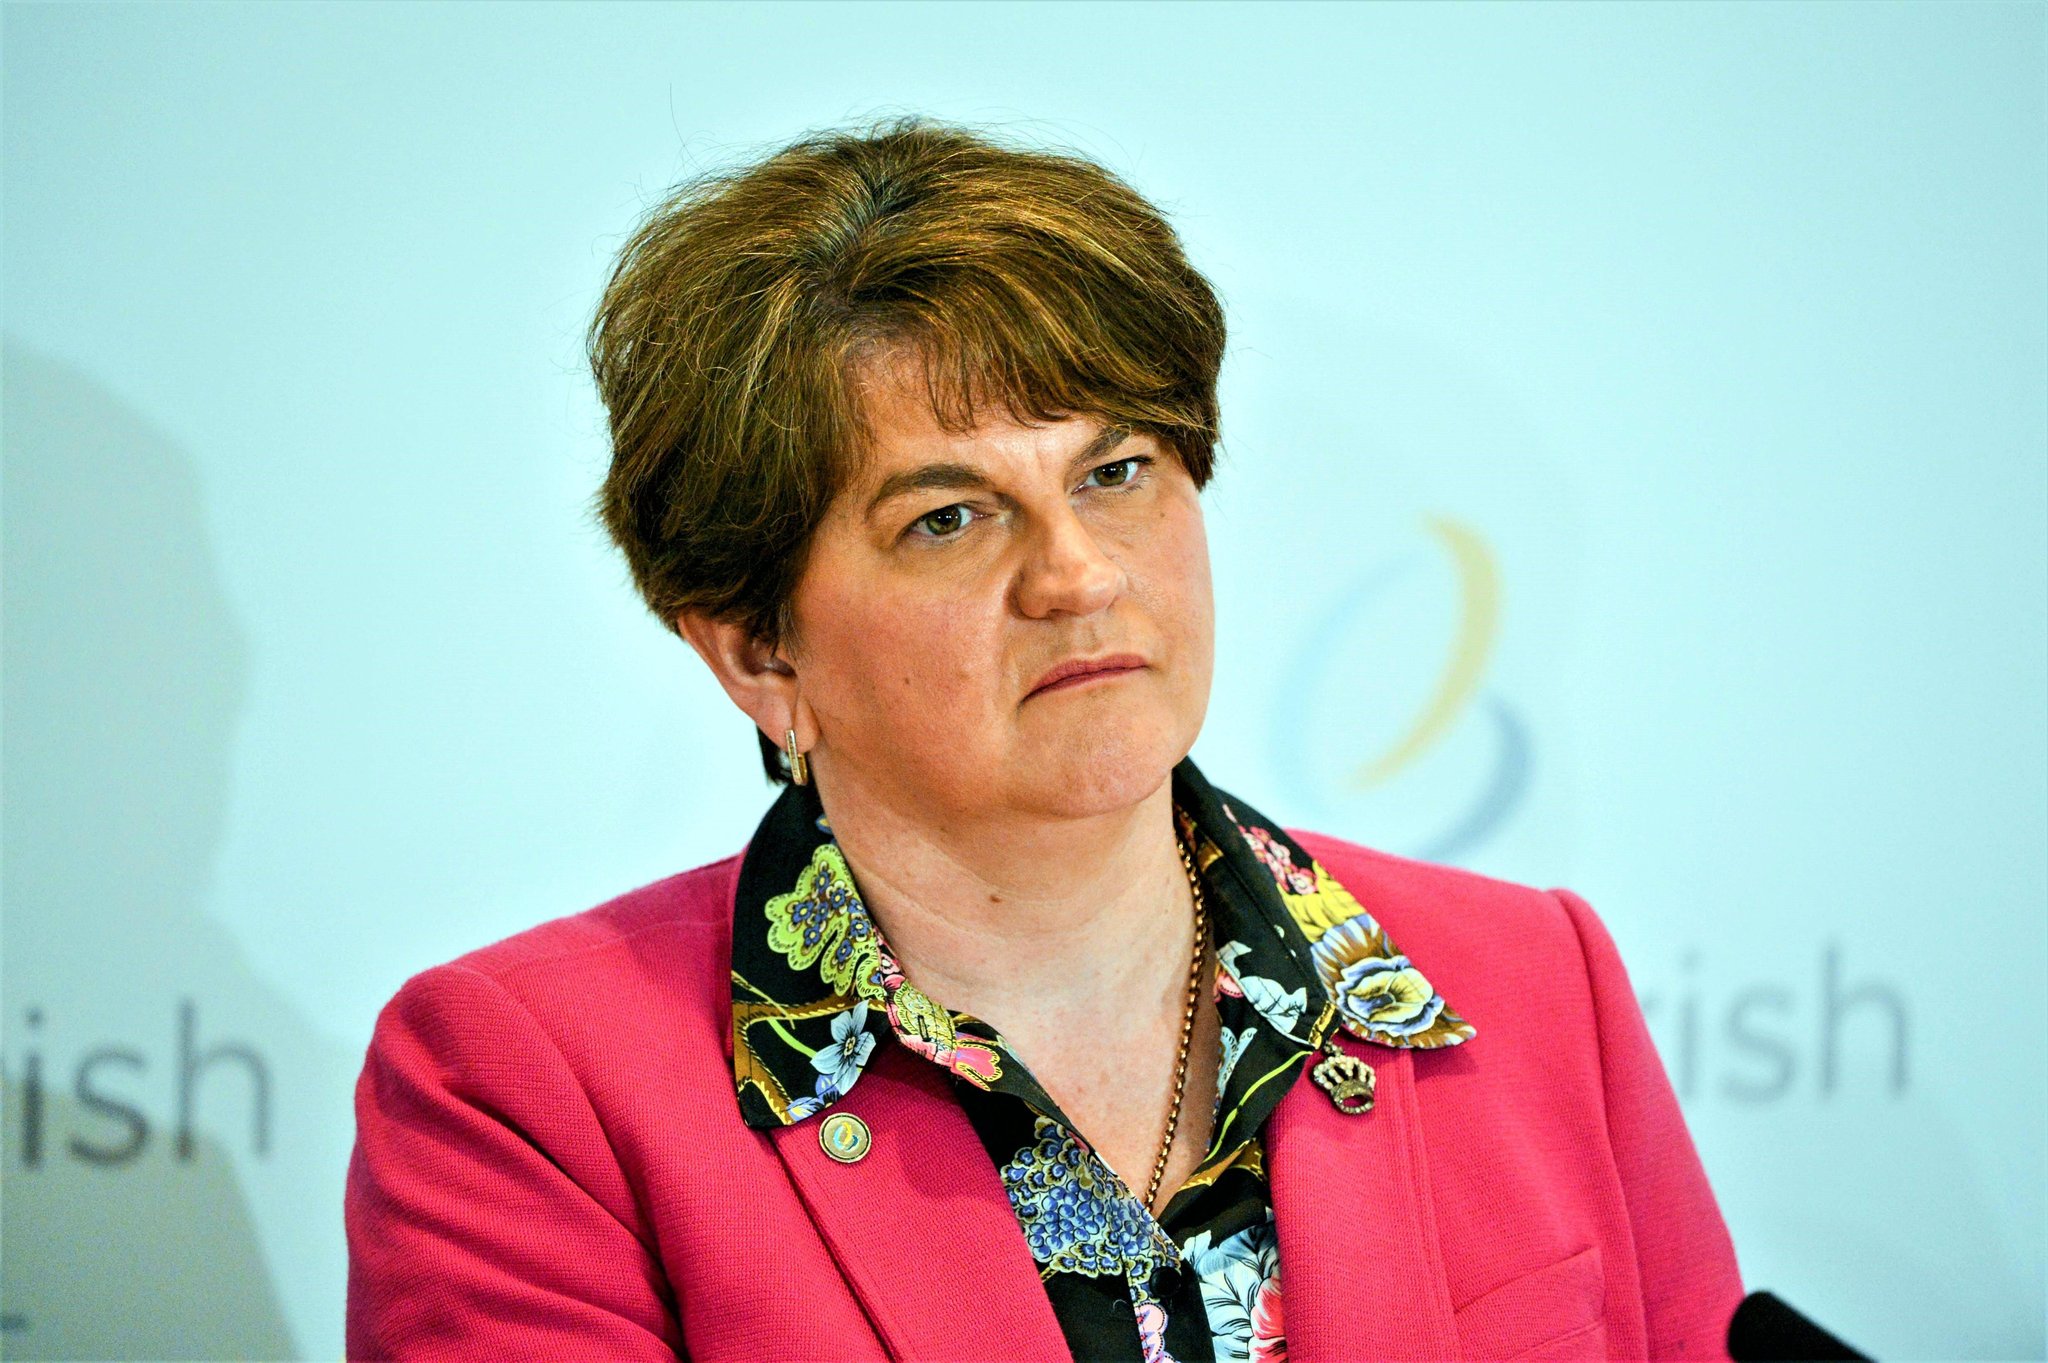 Arlene Foster still backing DUP in Assembly elections after tough year